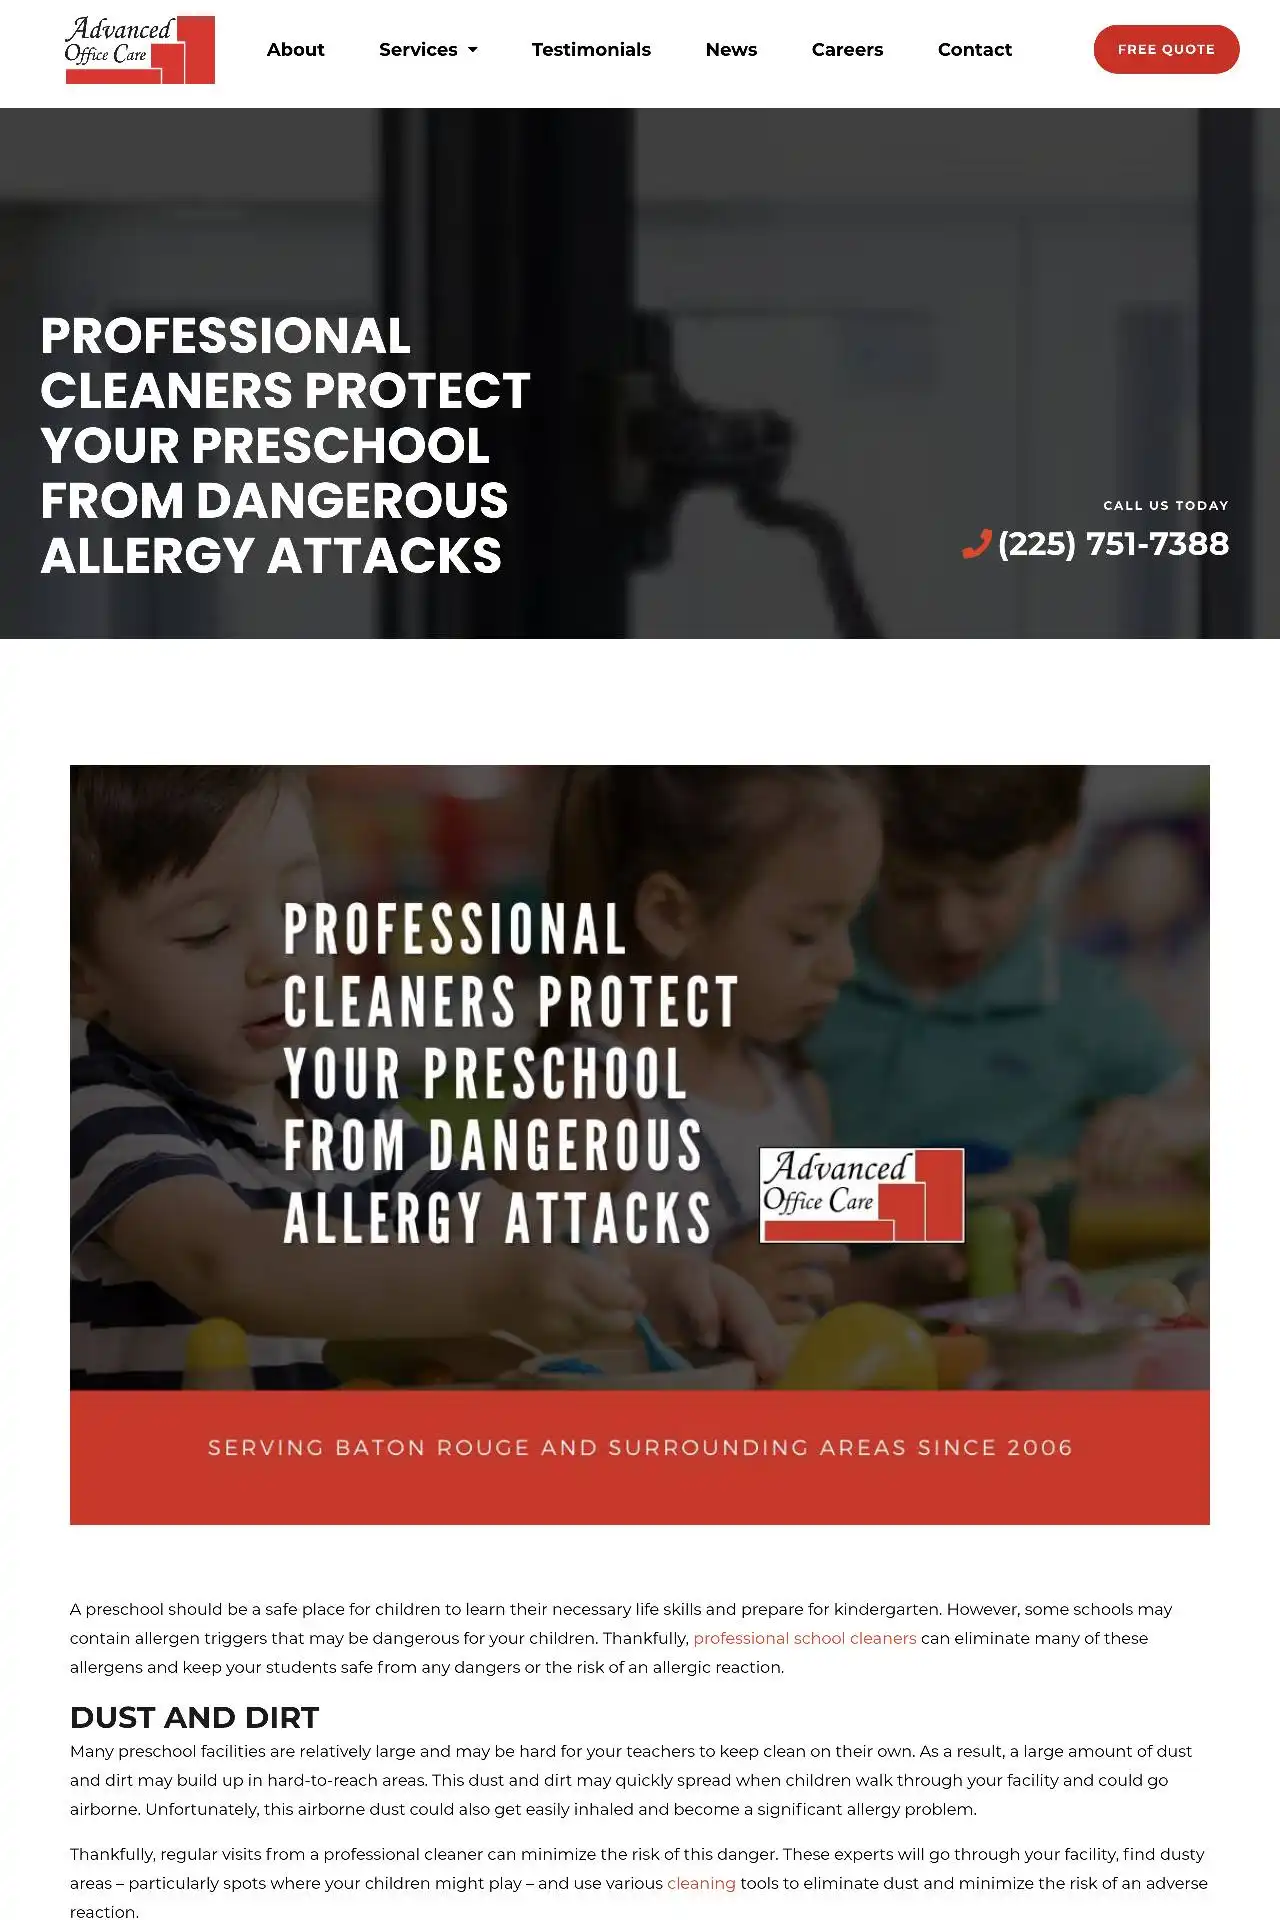 baton rouge cleaning company website design development https aocla.com cleaning professional cleaners protect your preschool from dangerous allergy attacks